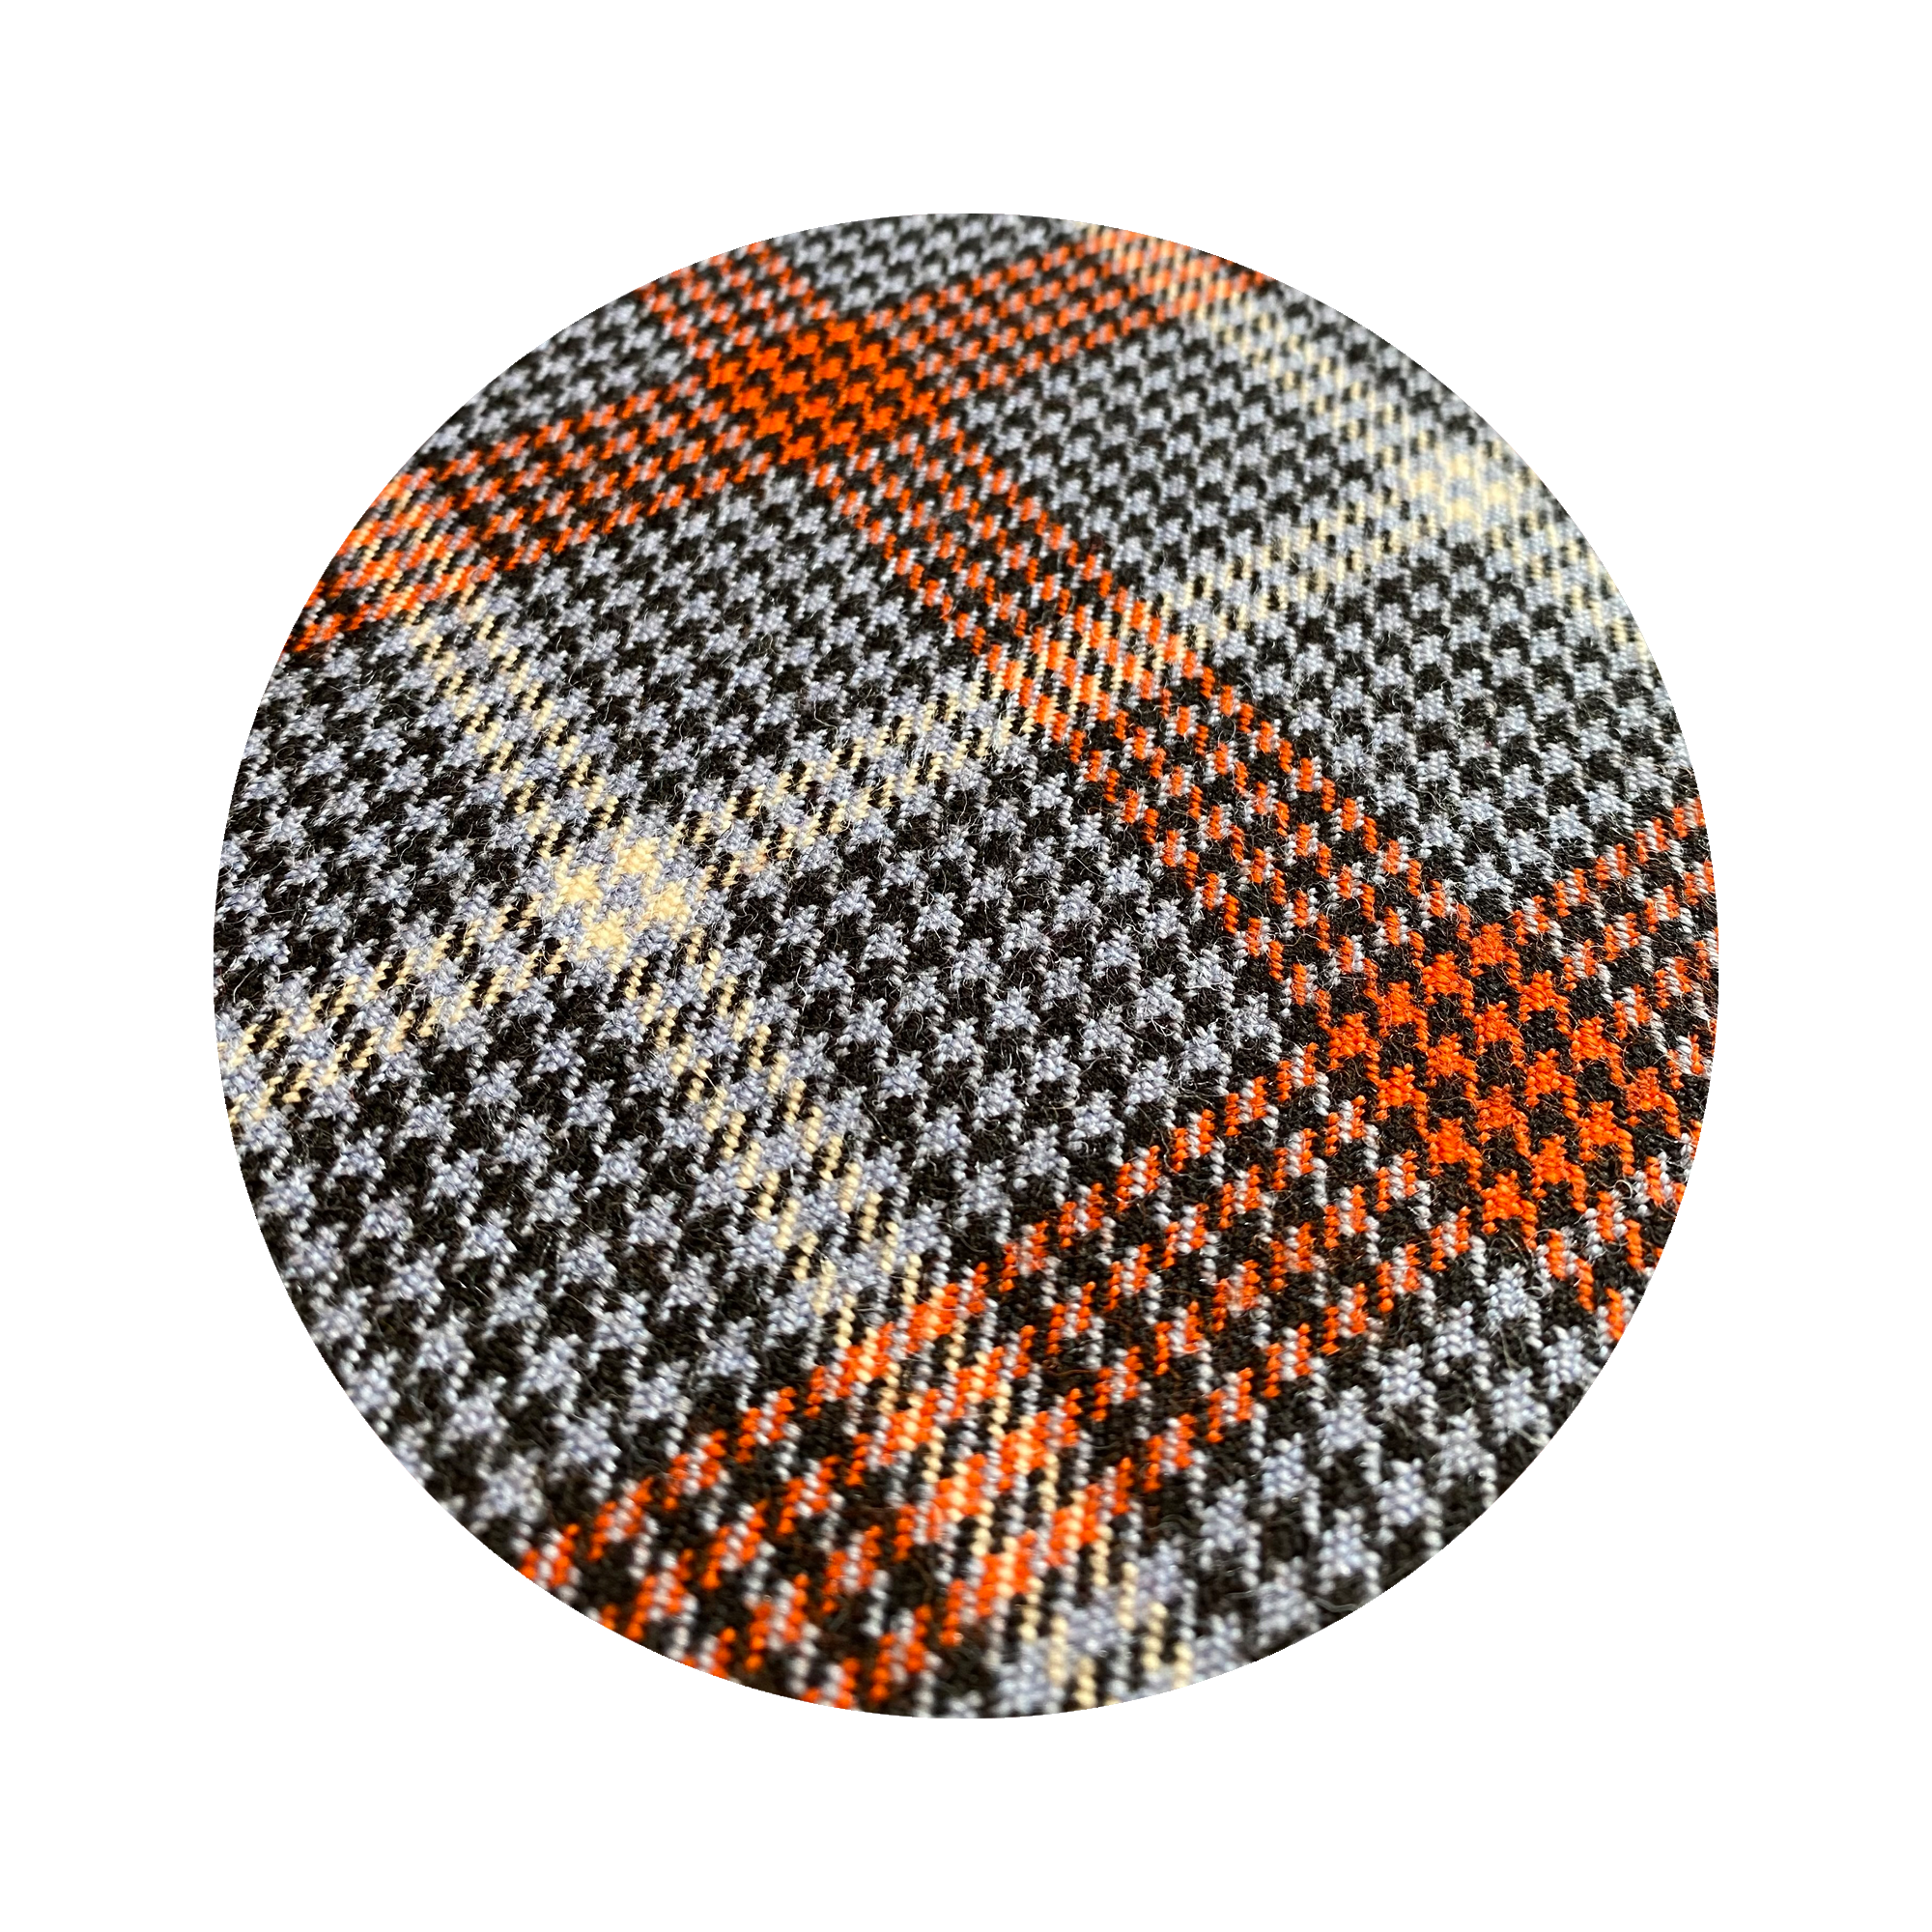 SOLM (Racing) Houndstooth WOOL Material only